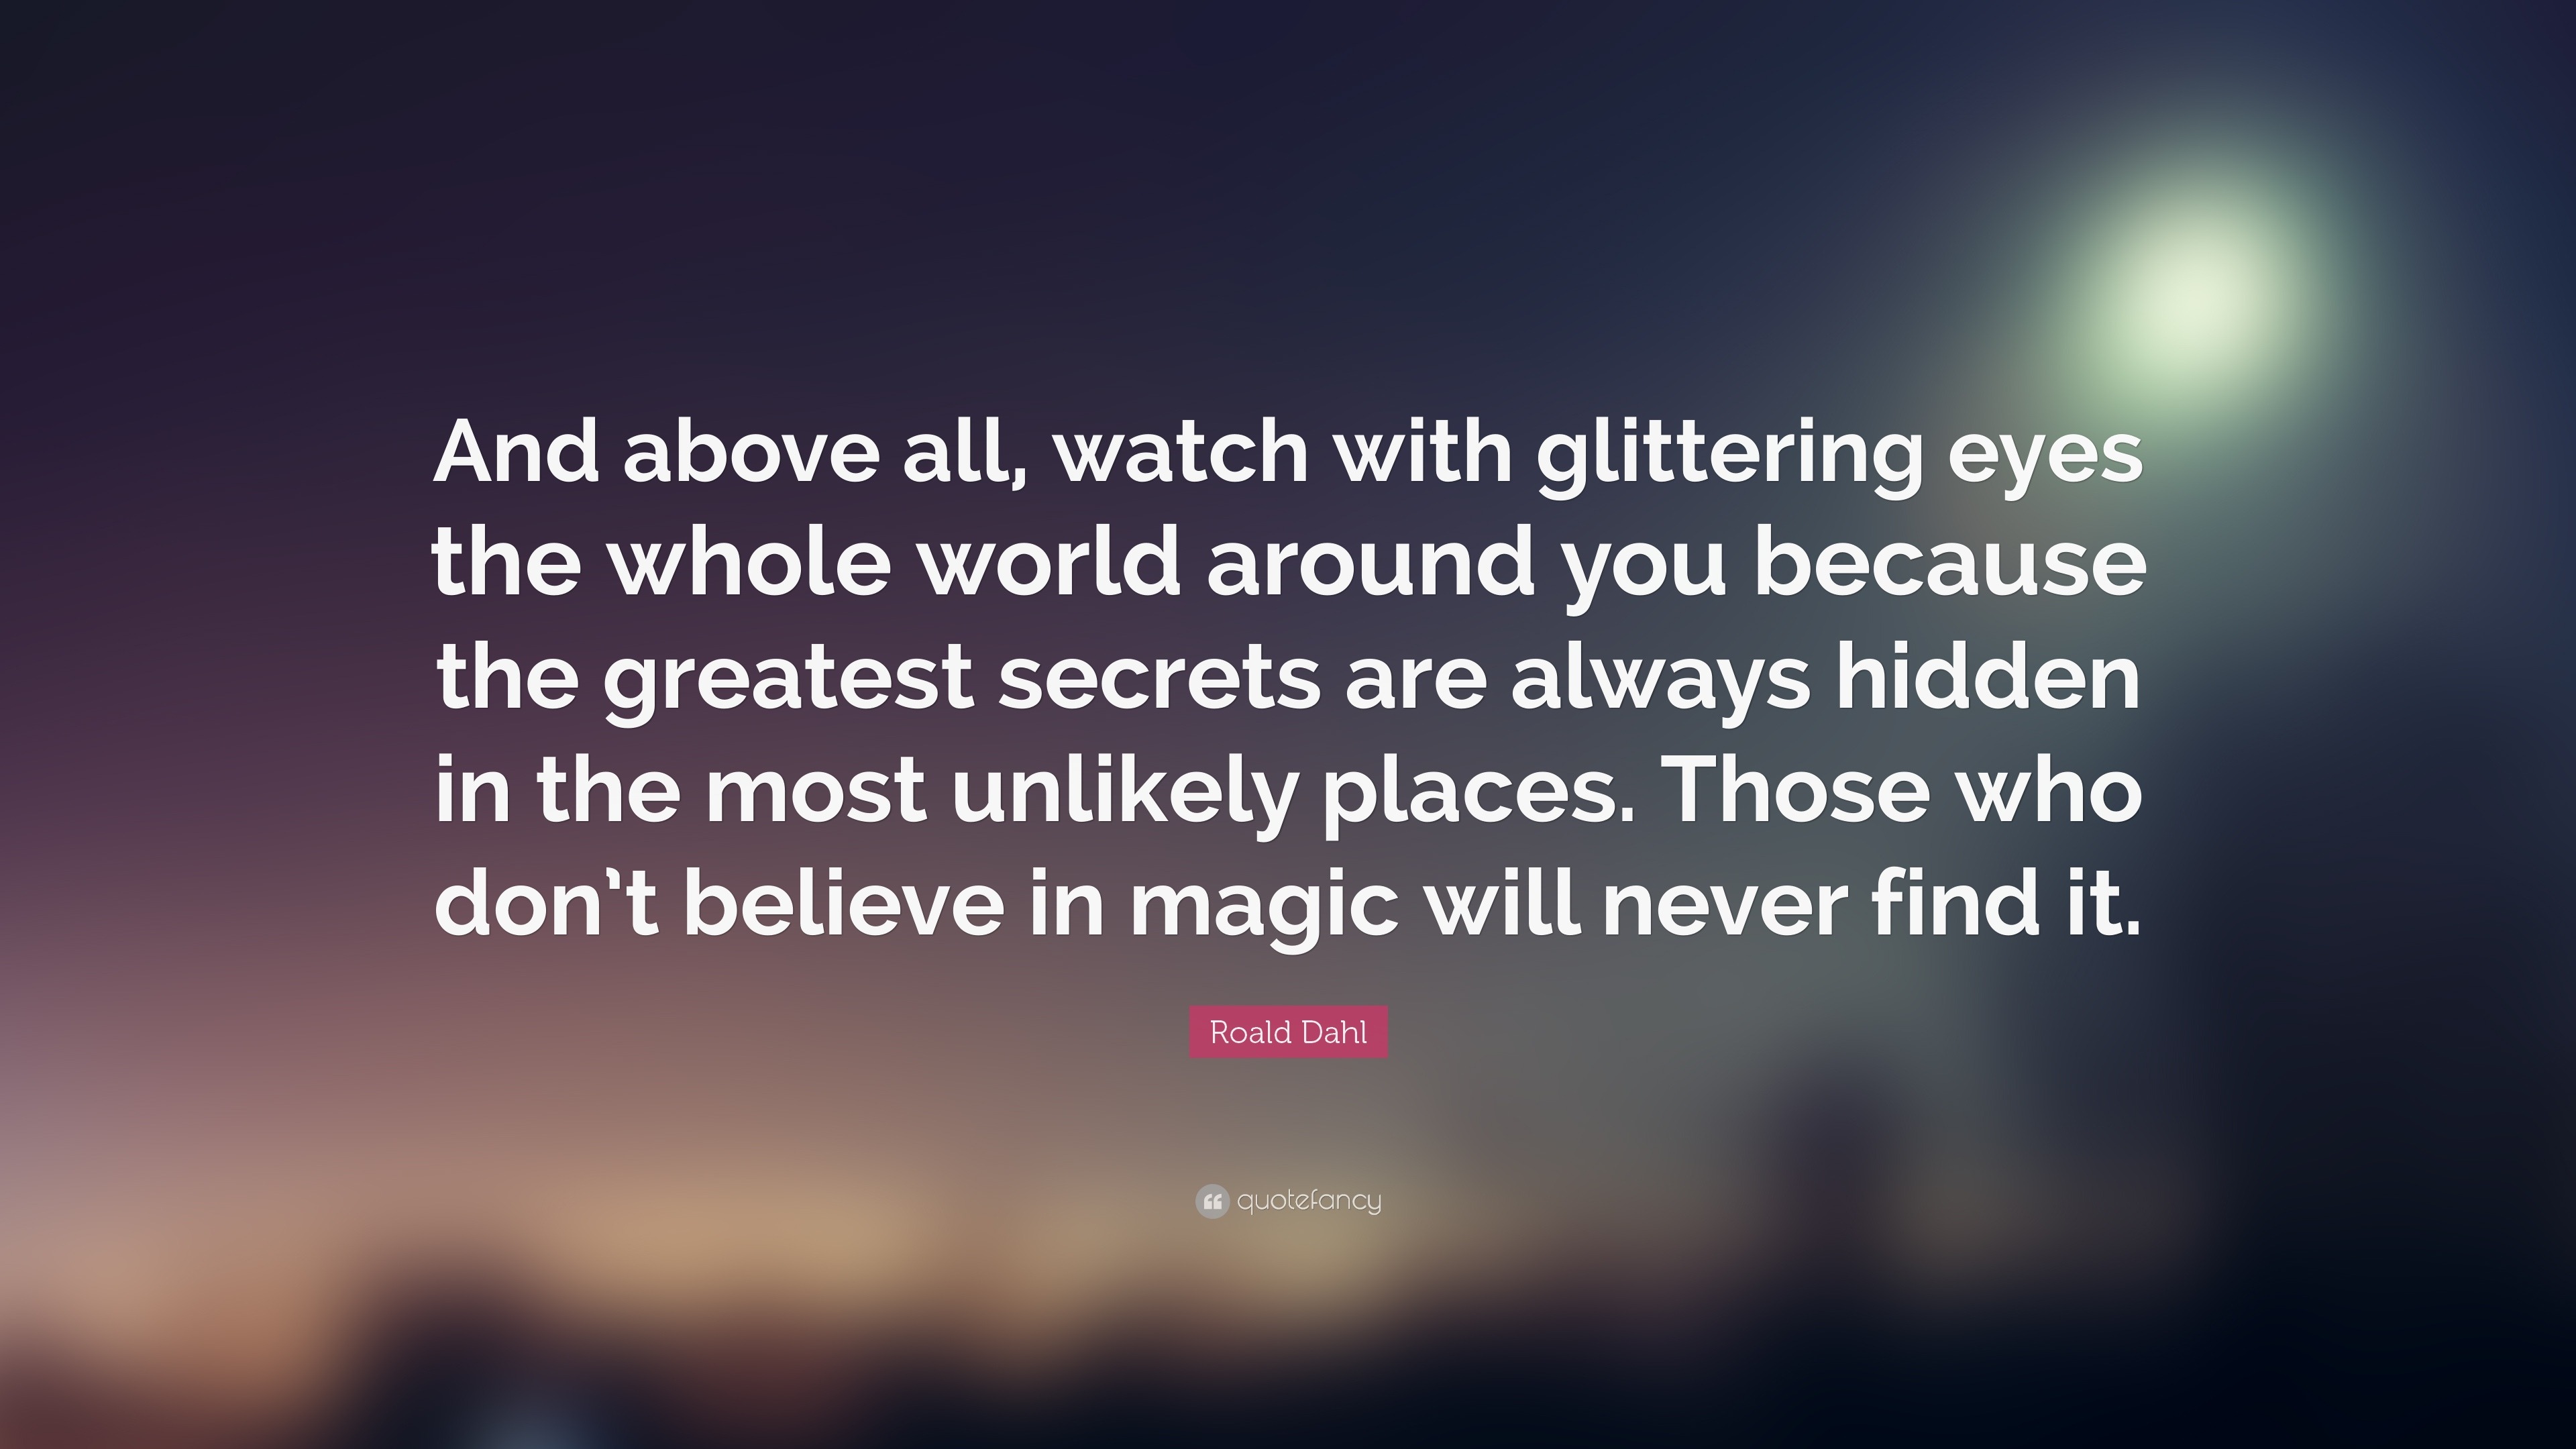 Roald Dahl Quote: “And Above All, Watch With Glittering Eyes The Whole World Around You Because The Greatest Secrets Are Always Hidden In T...”